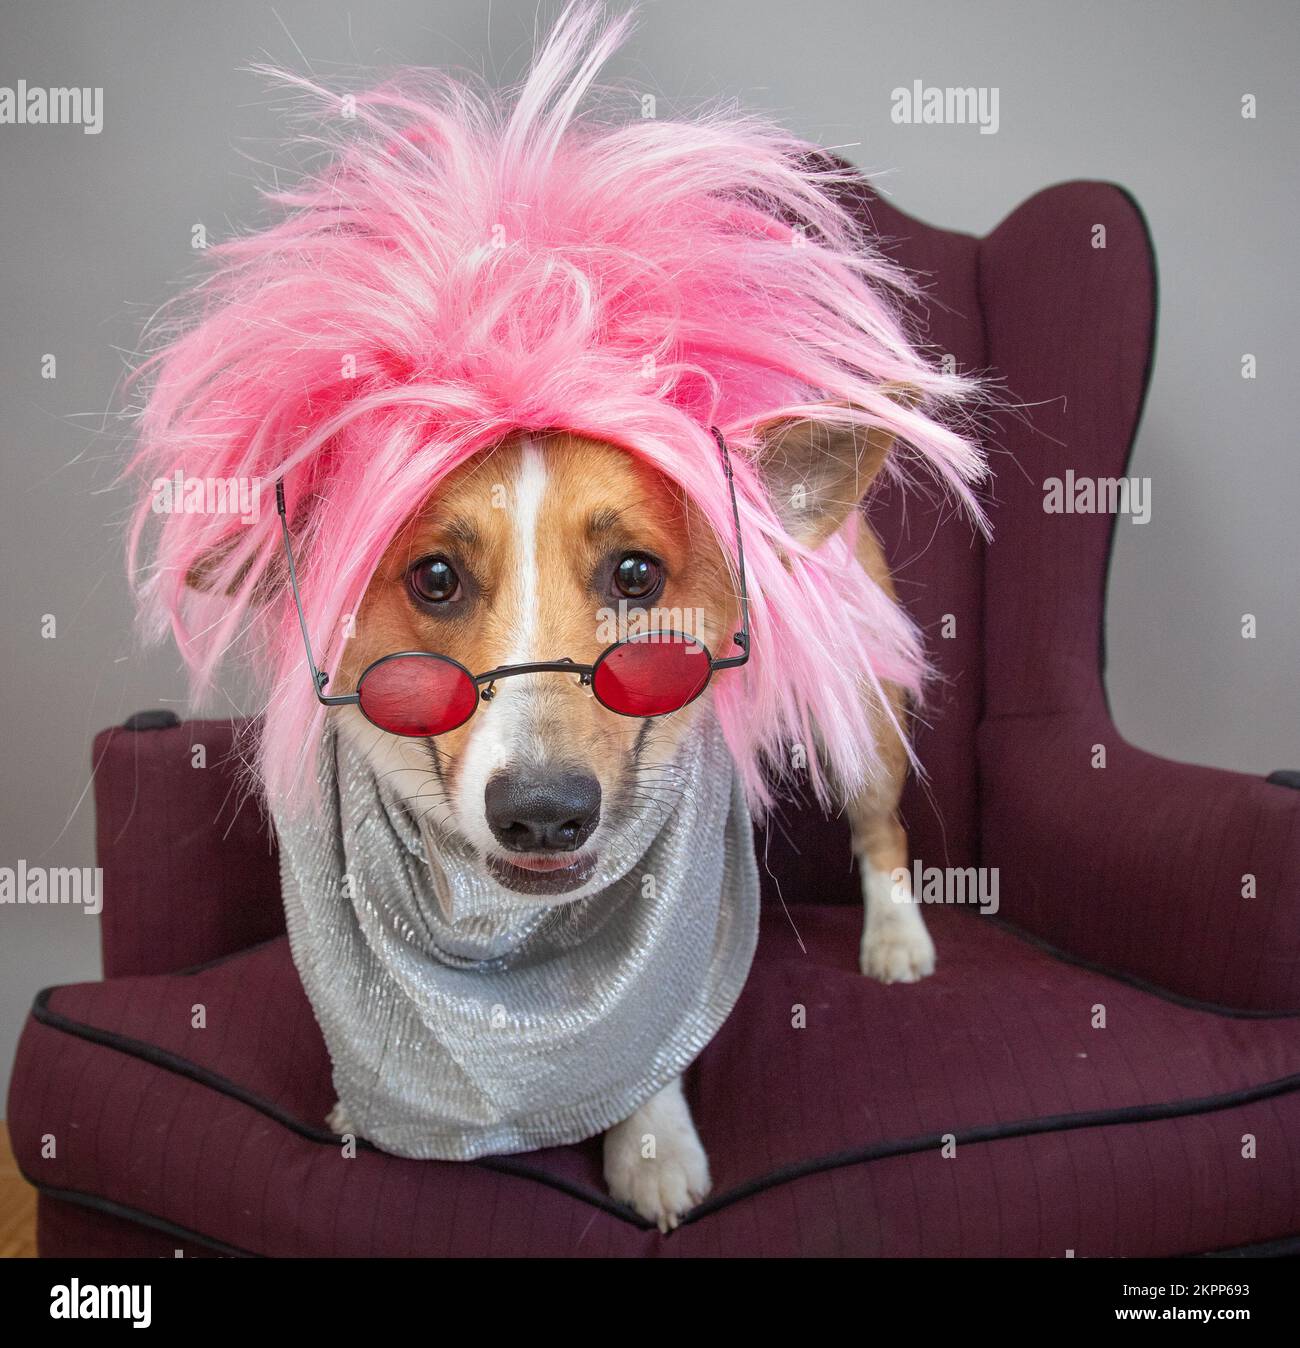 Pembroke Welsh Corgi dressed as a rockstar with a pink wig and glasses Stock Photo